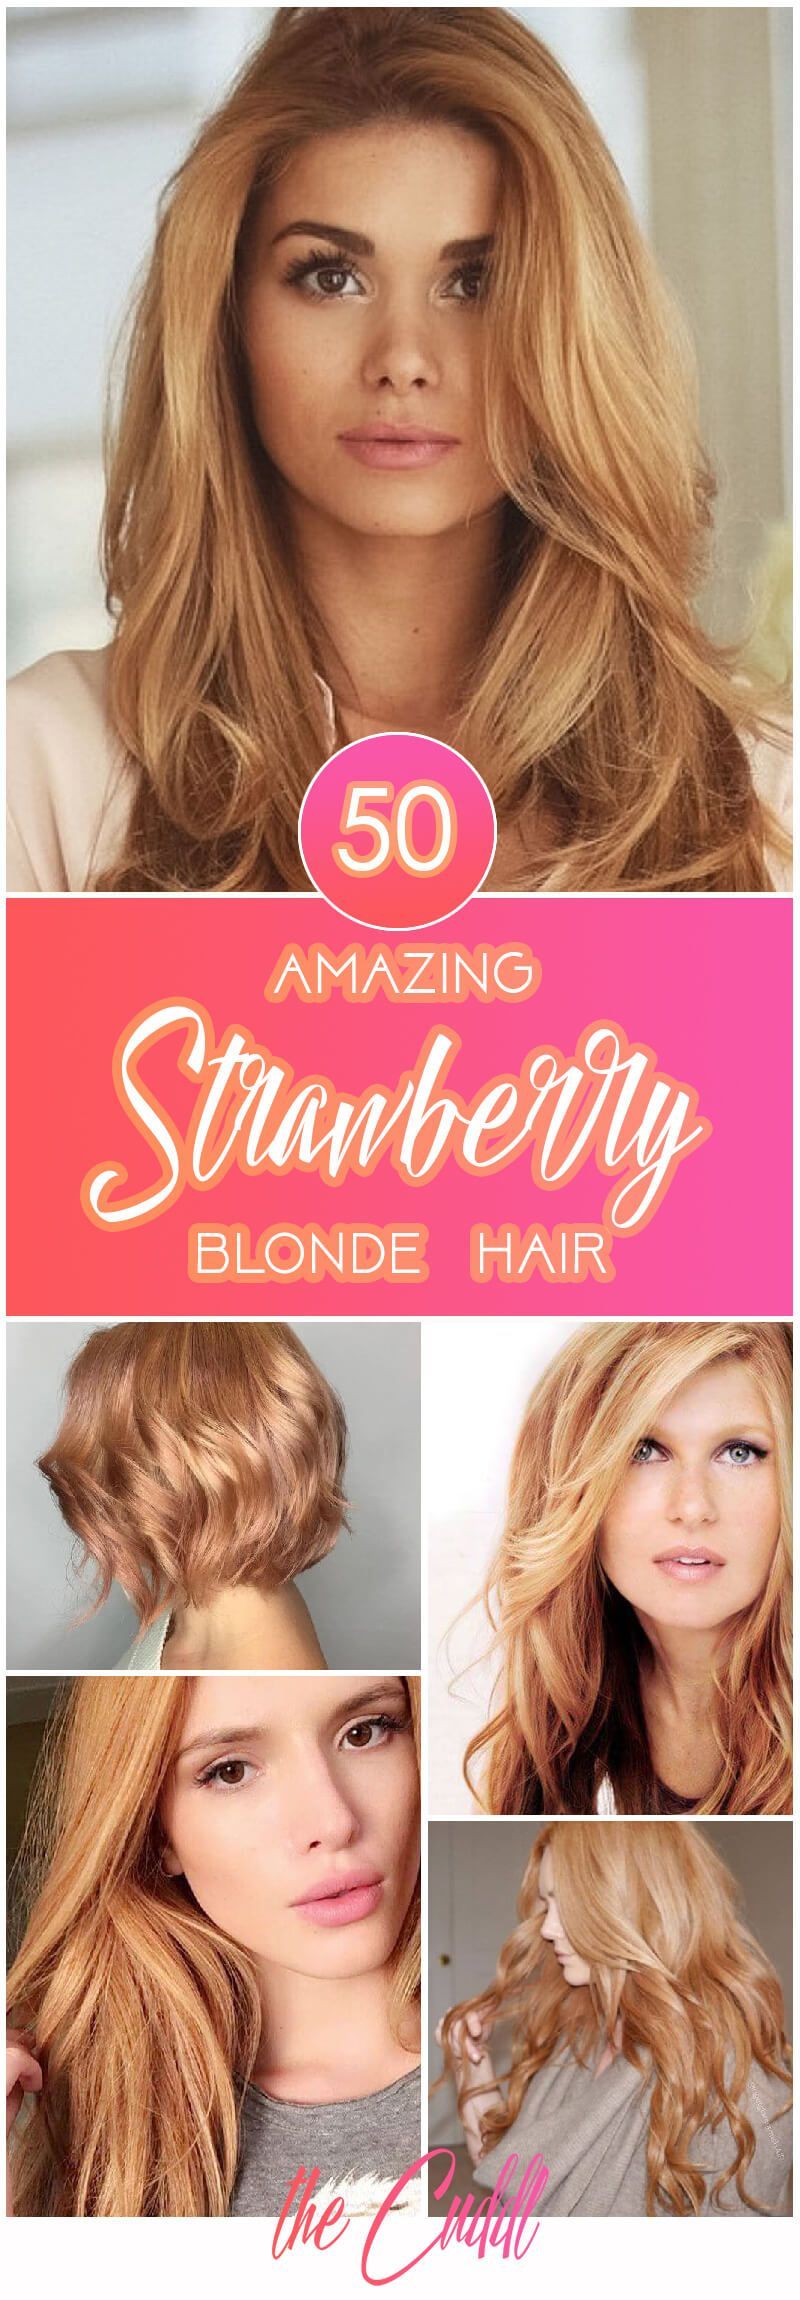 1576159658_159_50-of-the-Most-Trendy-Strawberry-Blonde-Hair-Colors-for.jpg